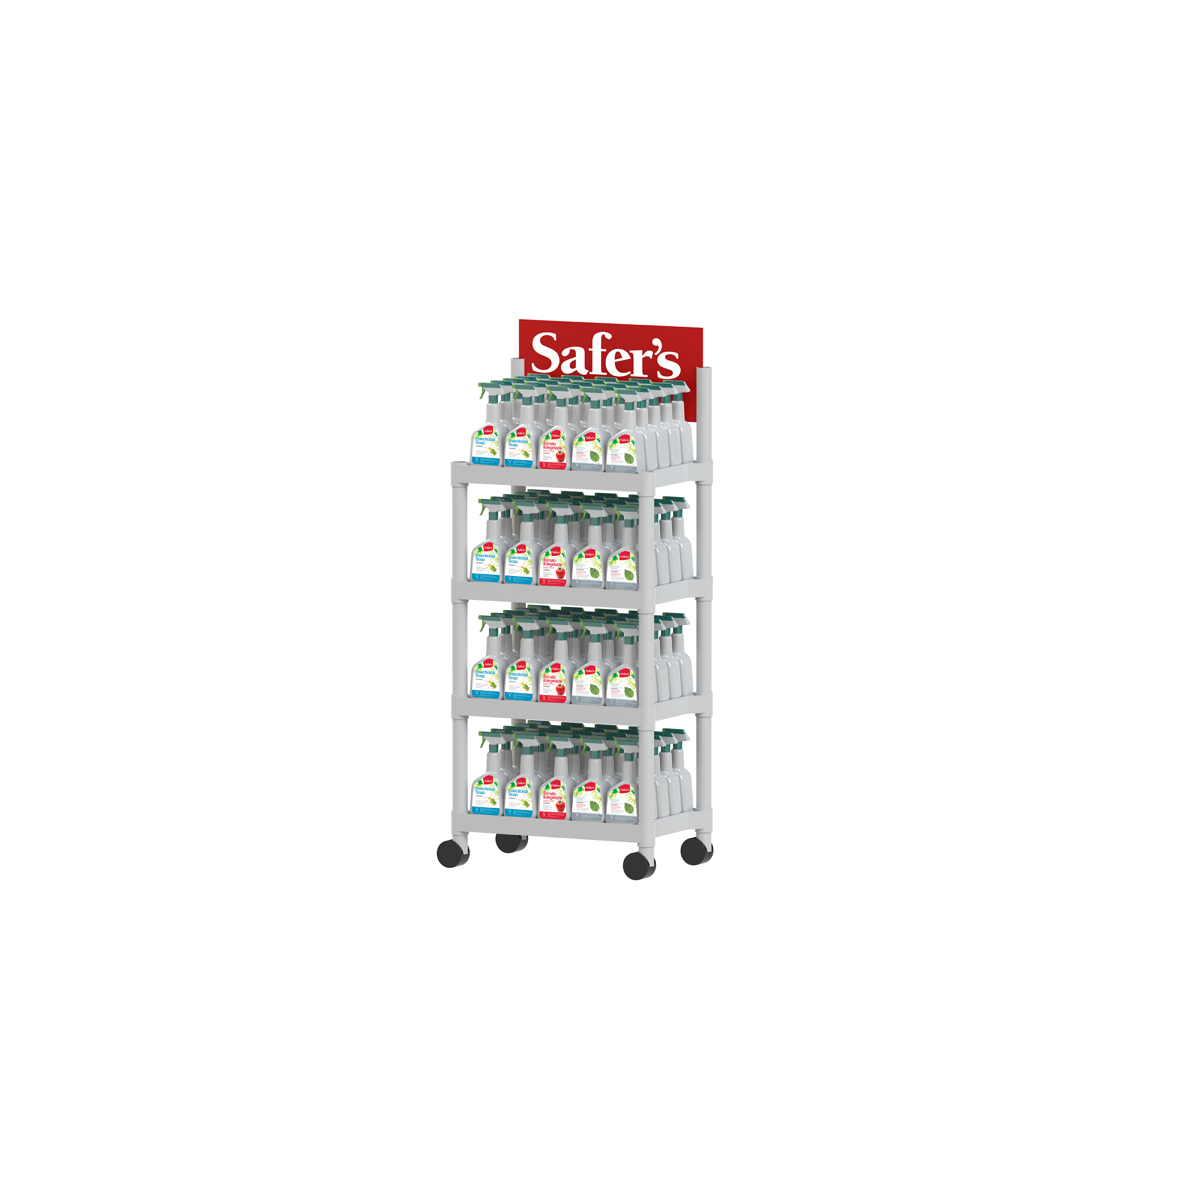 Picture of Safers Control Display (96 pcs)